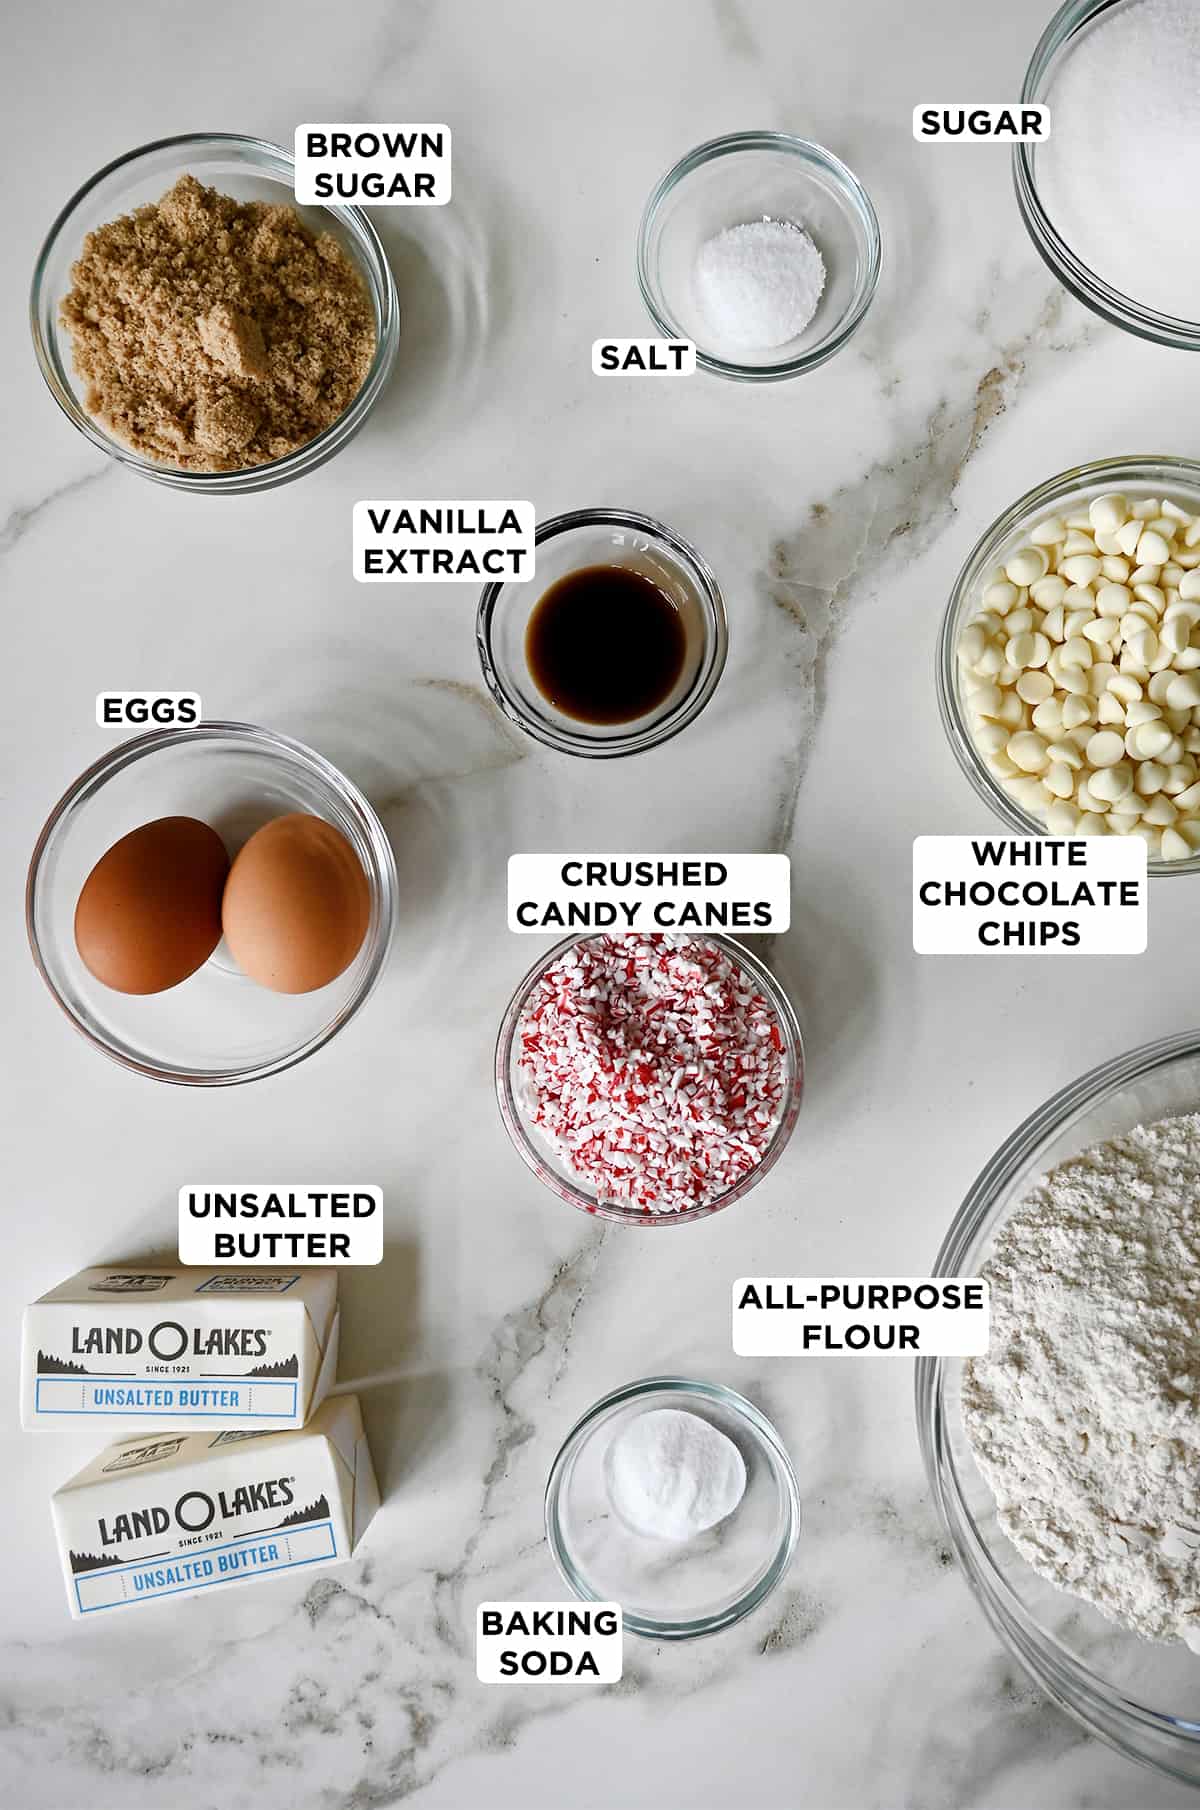 Various sizes of clear bowls containing the ingredients needed to make peppermint white chocolate cookies, including light brown sugar, salt, white sugar, vanilla extract, white chocolate chips, crushed candy canes, all-purpose flour, baking soda, butter and eggs.